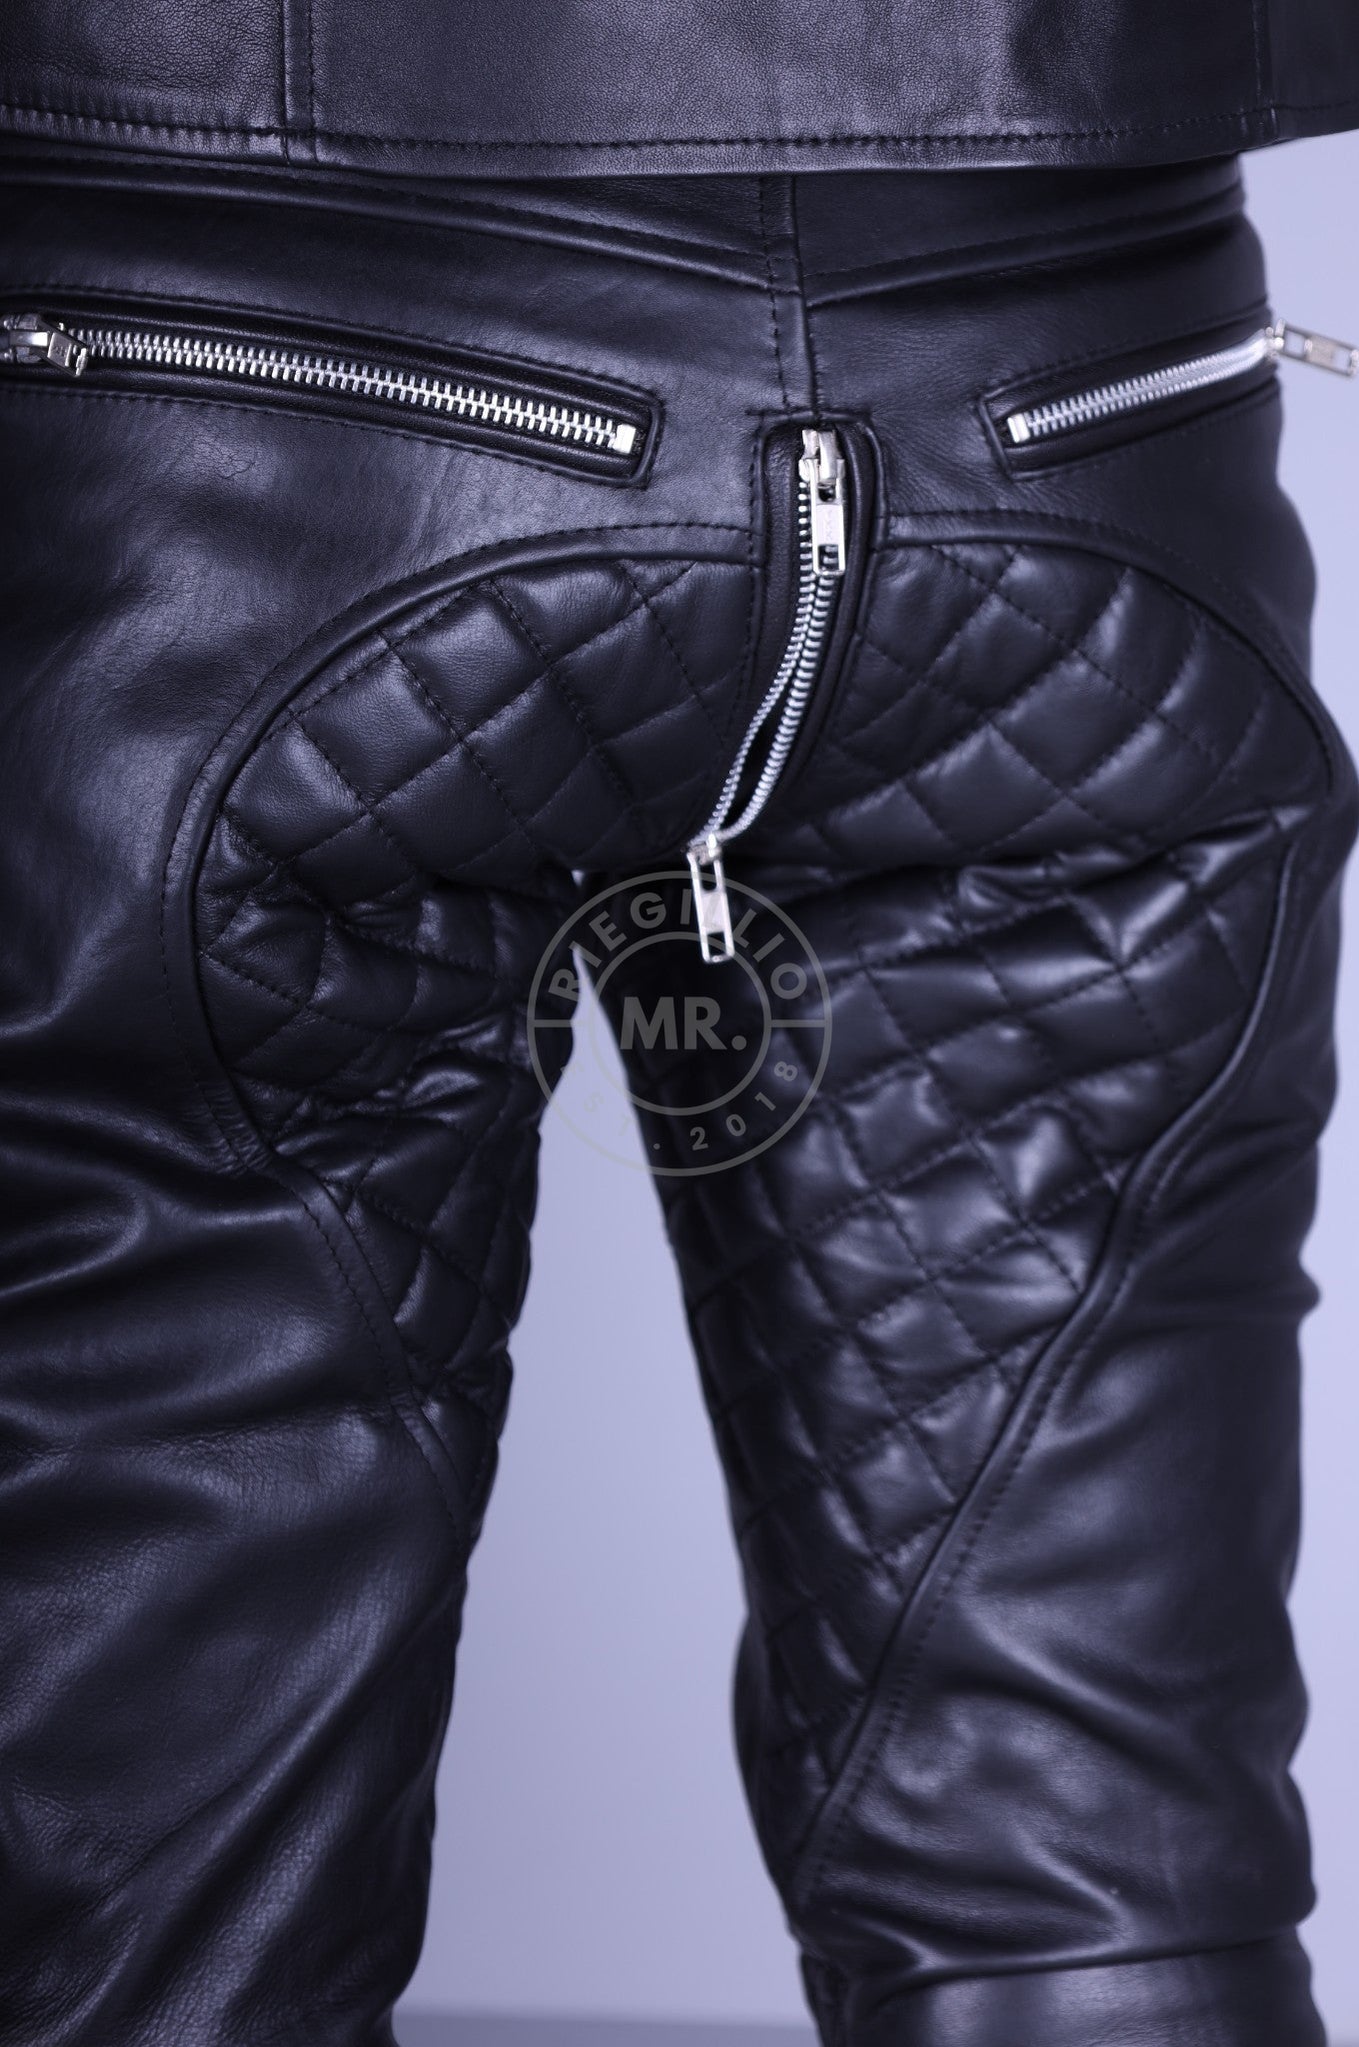 Padded Leather Pants - Black Piping at MR. Riegillio